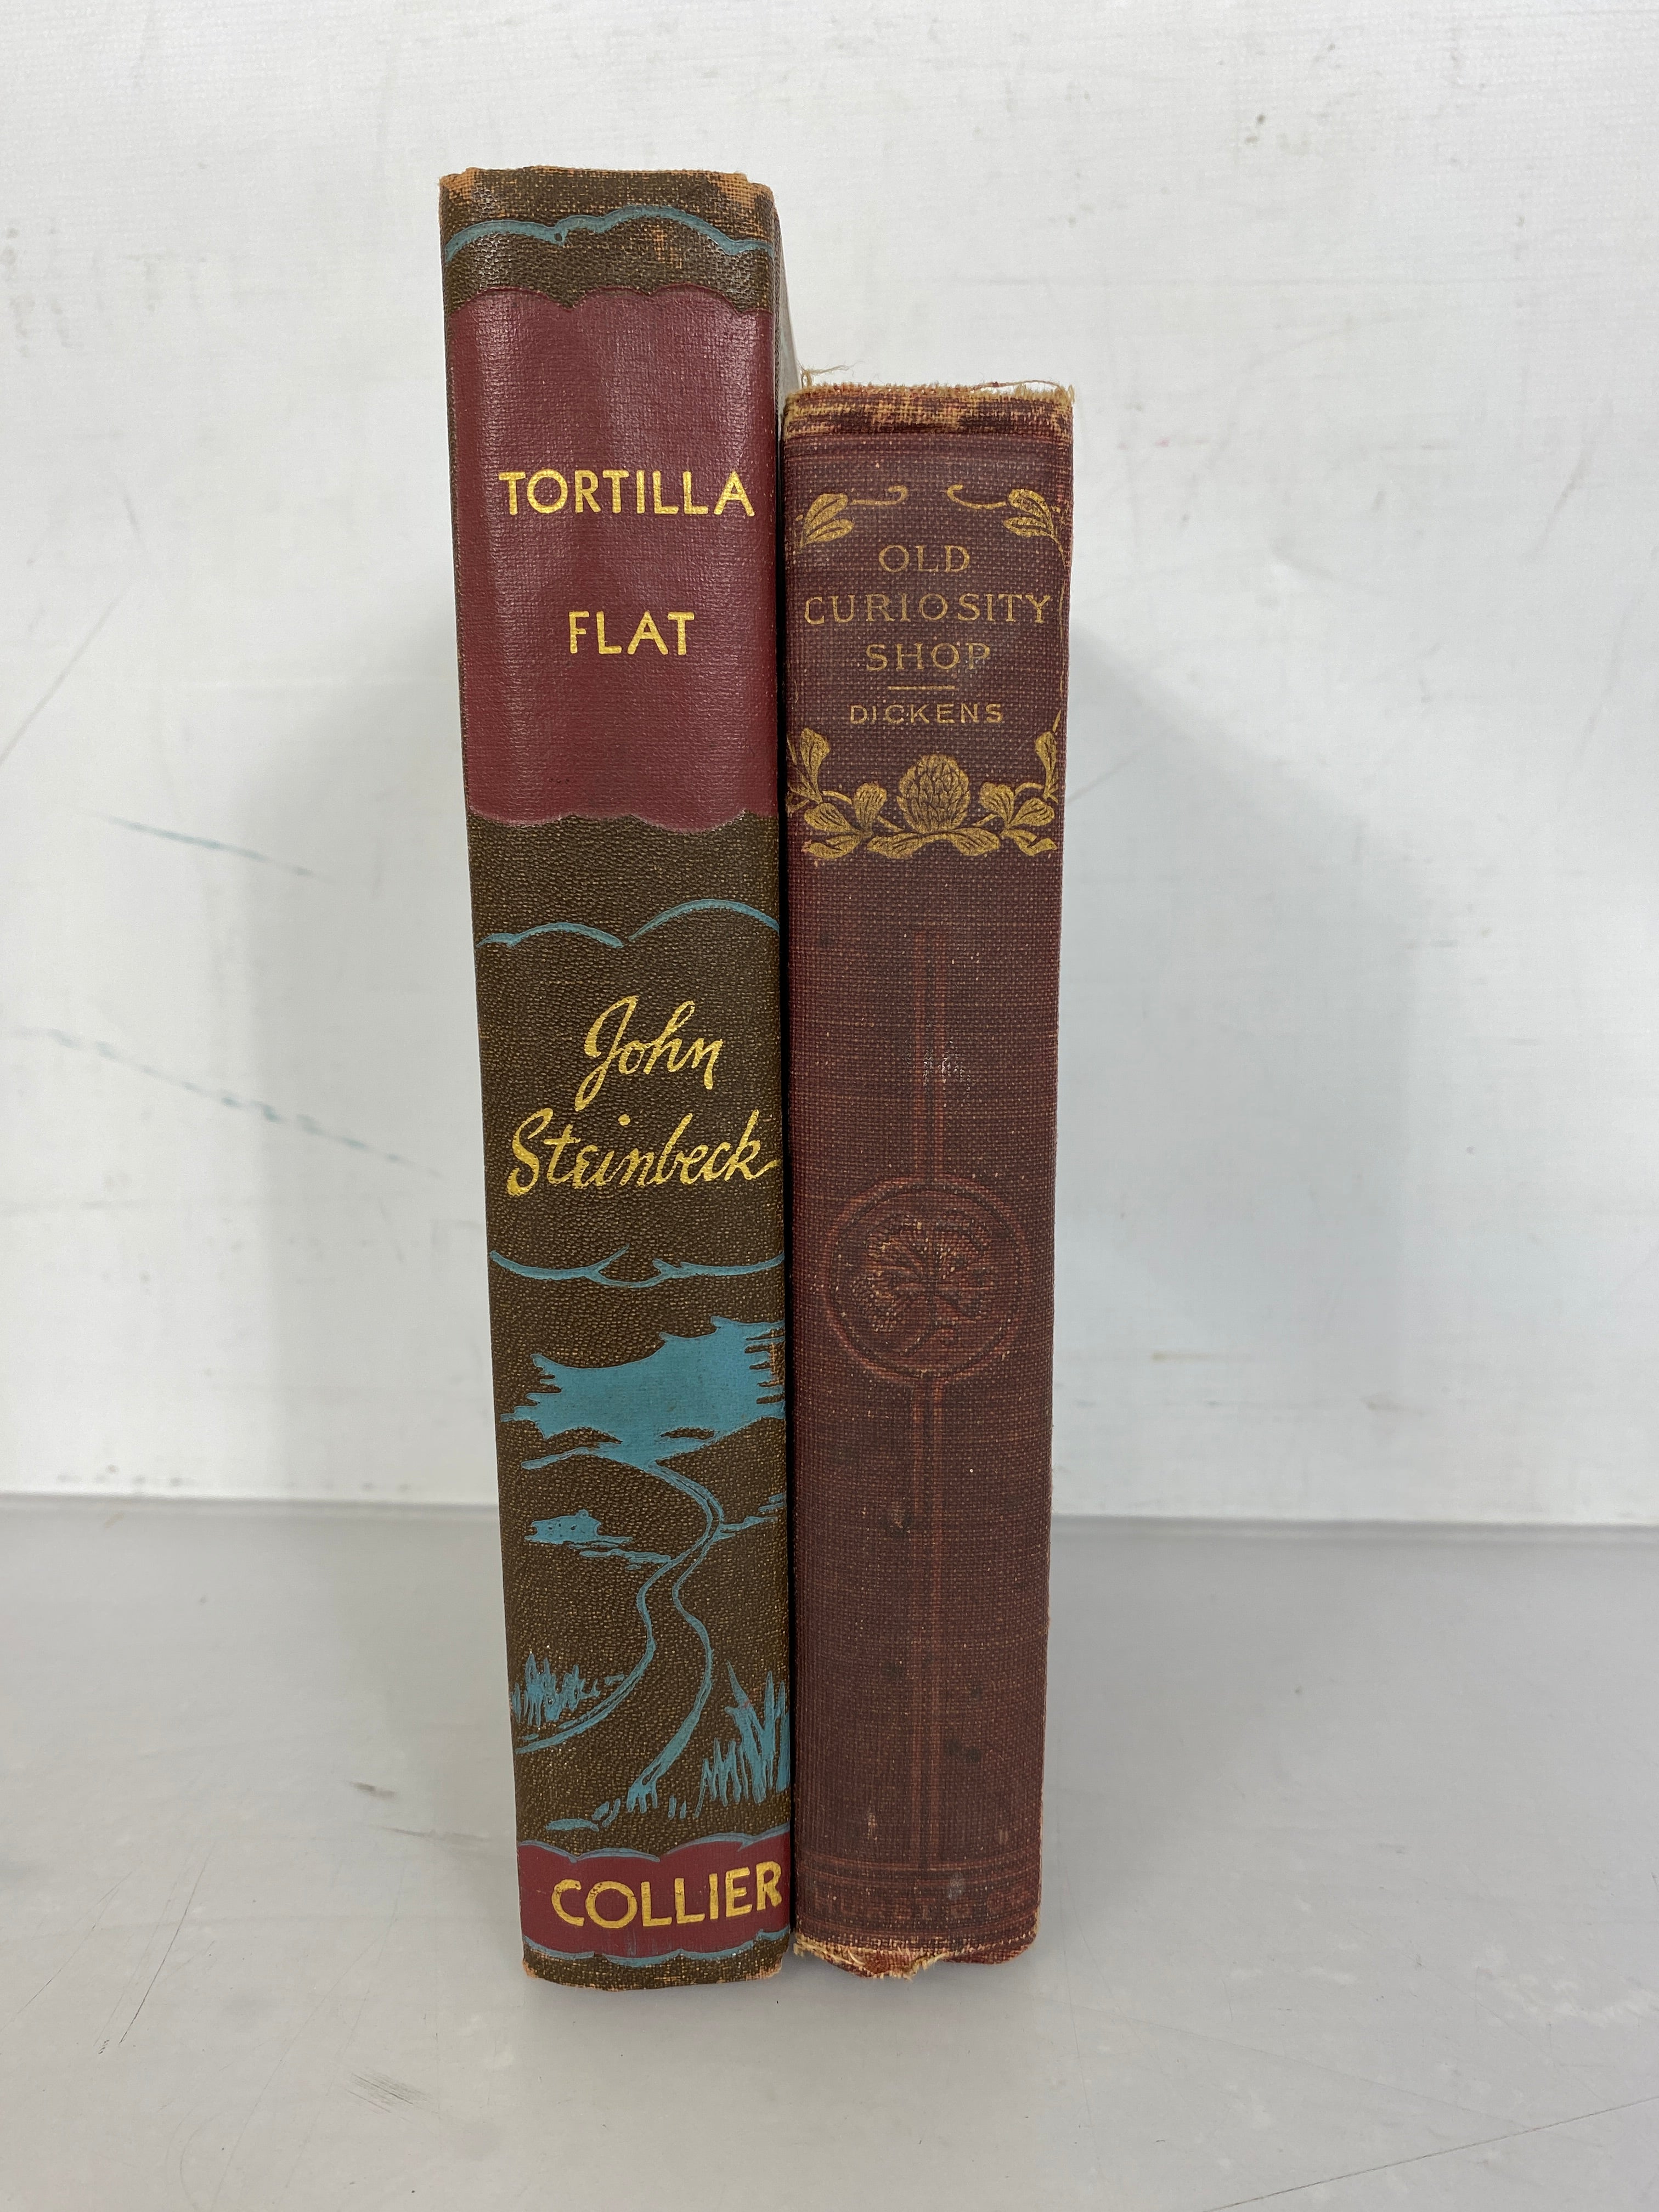 Lot of 2: The Old Curiosity Shop by Dickens/Tortilla Flat by Steinbeck HC